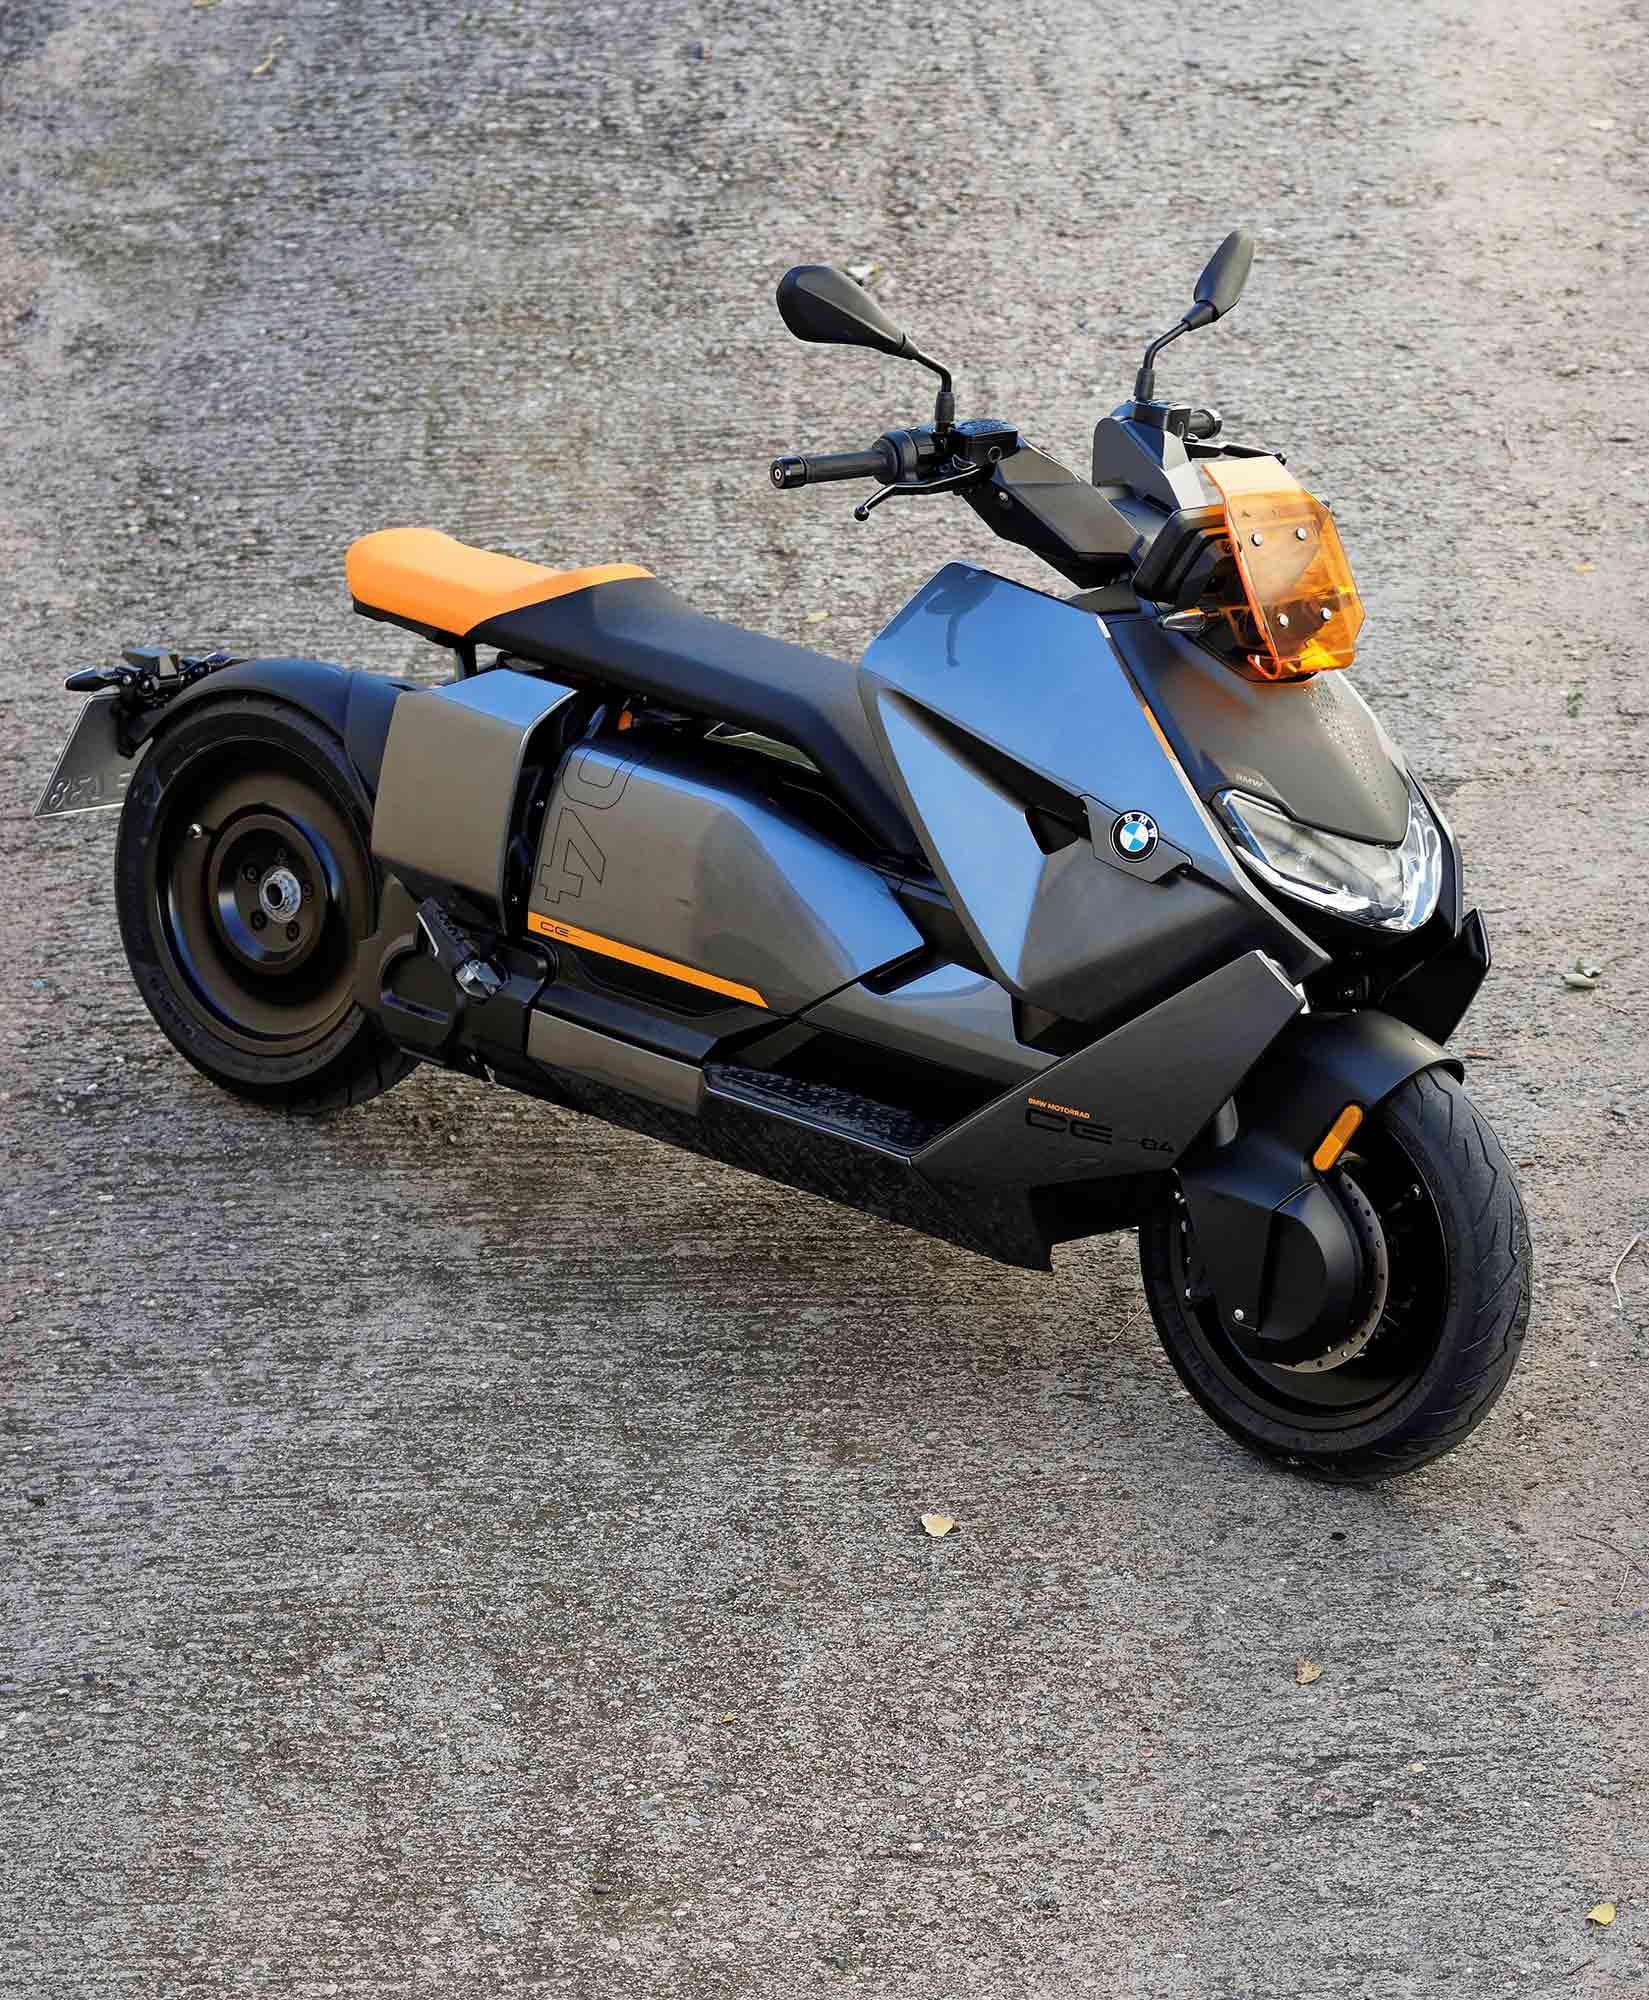 The 65.9-inch wheelbase is especially long for a scooter, which makes the CE 04 feel spacious and super stable. That length also means more effort is needed in tighter turns.